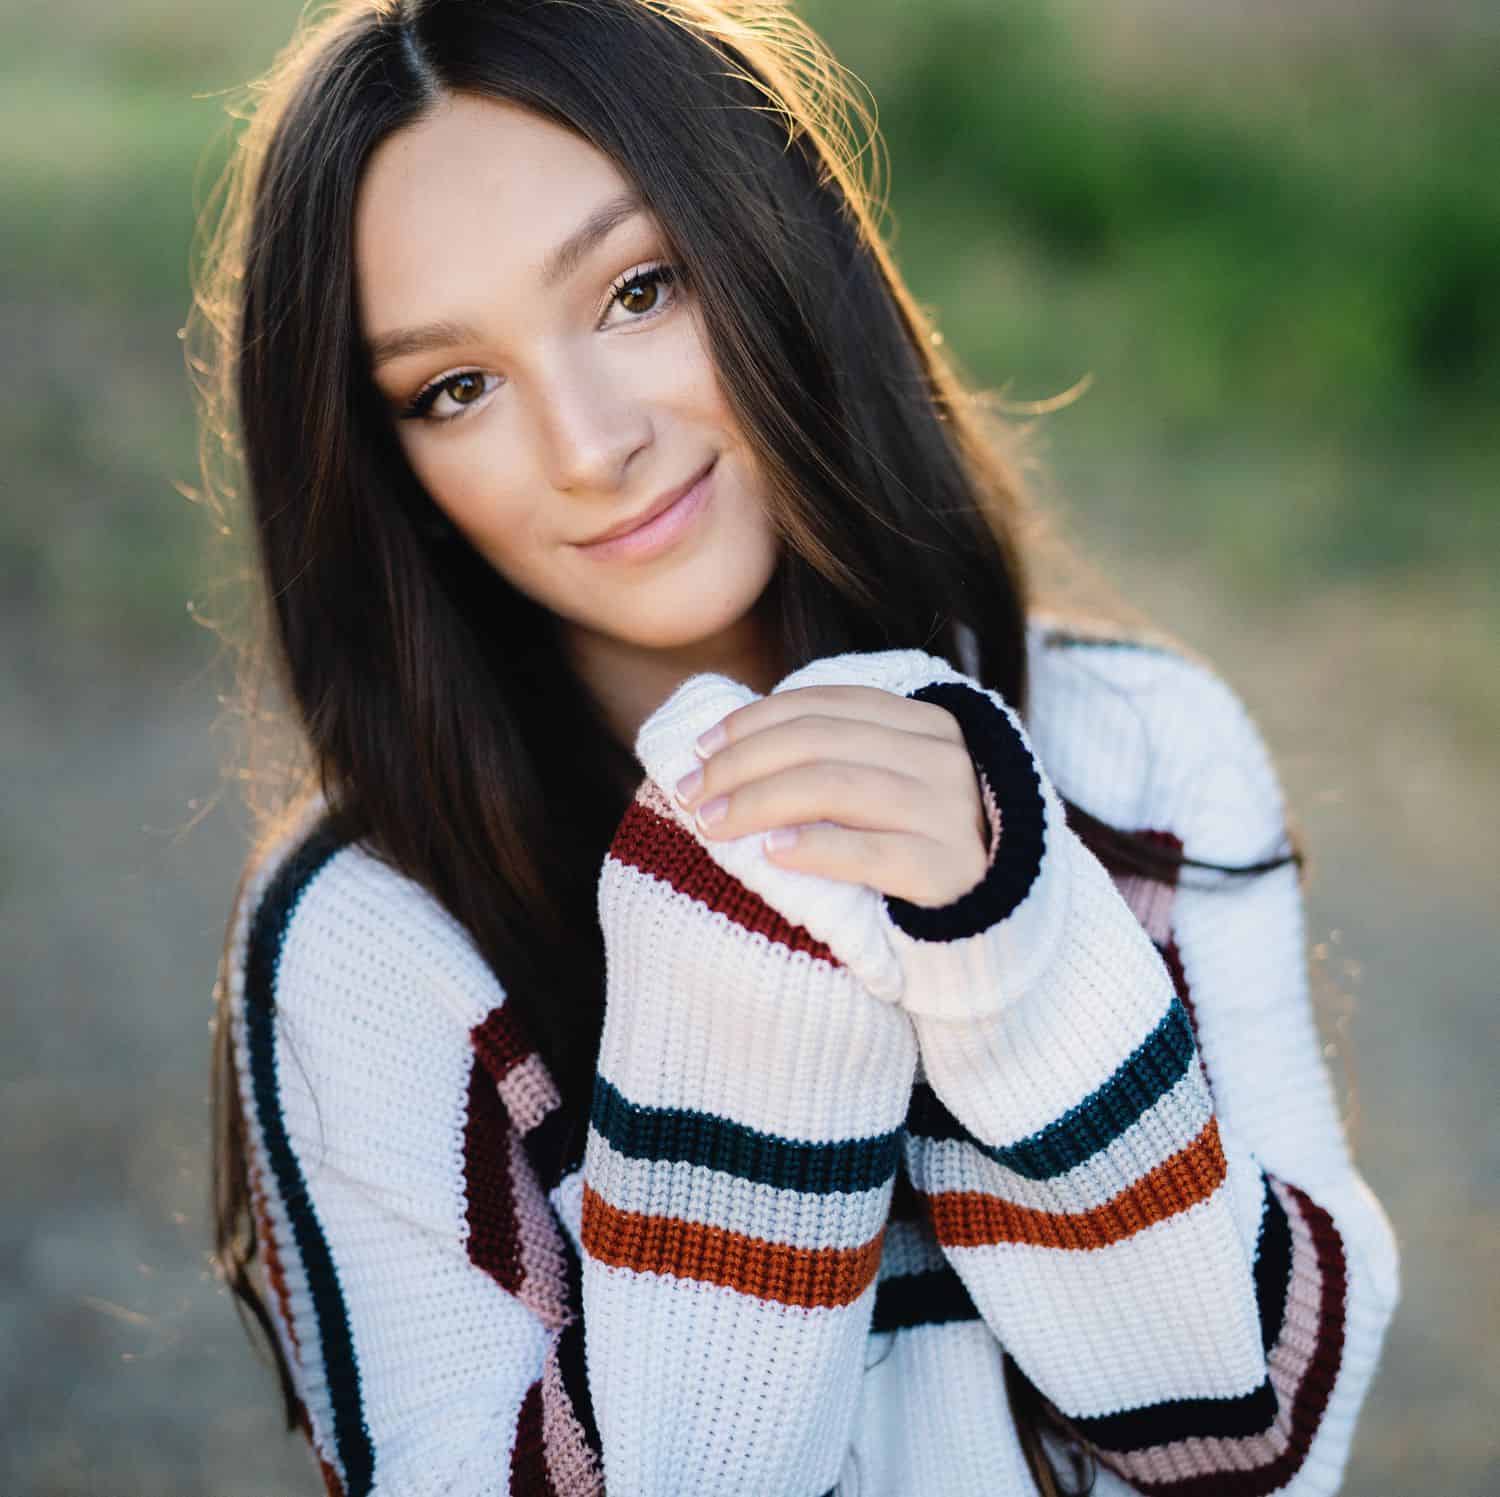 A senior girl in a striped sweater stands backlit in a field with her hands clasped by her face